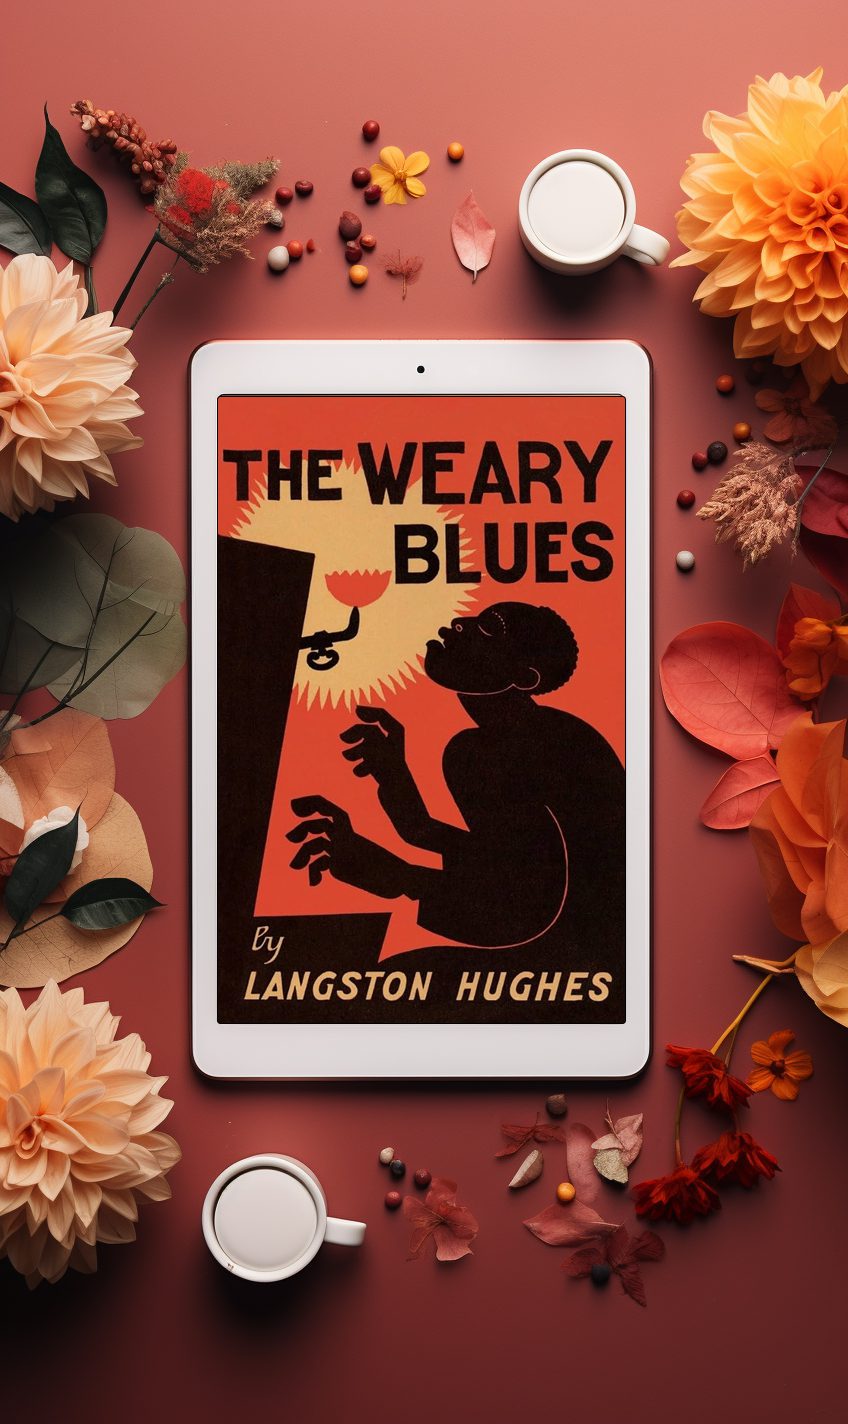 the weary blues by langston hughes